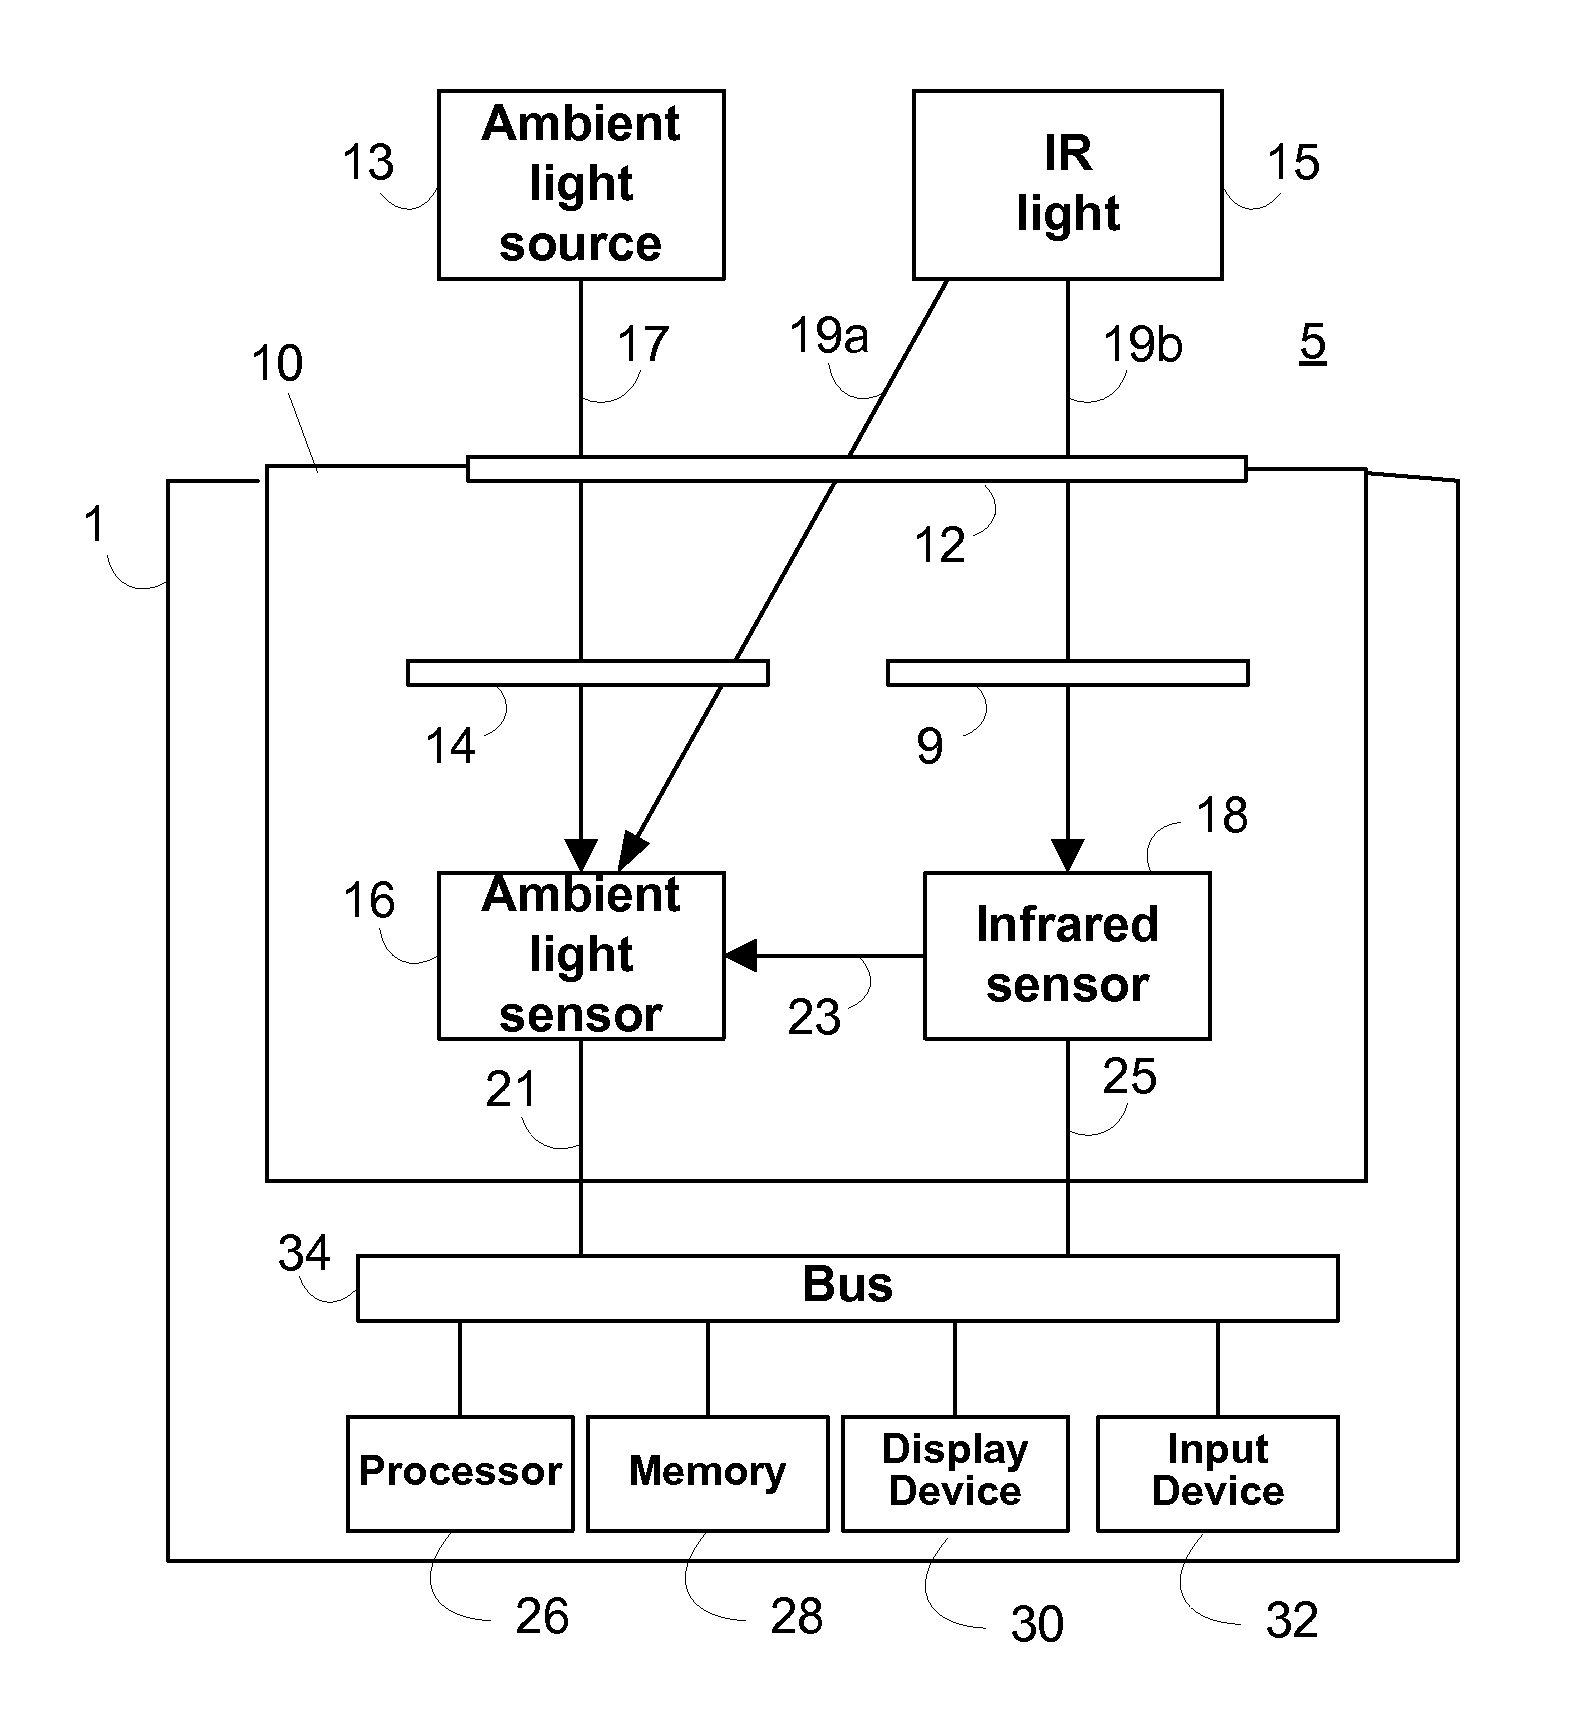 Ambient light sensor with reduced sensitivity to noise from infrared sources